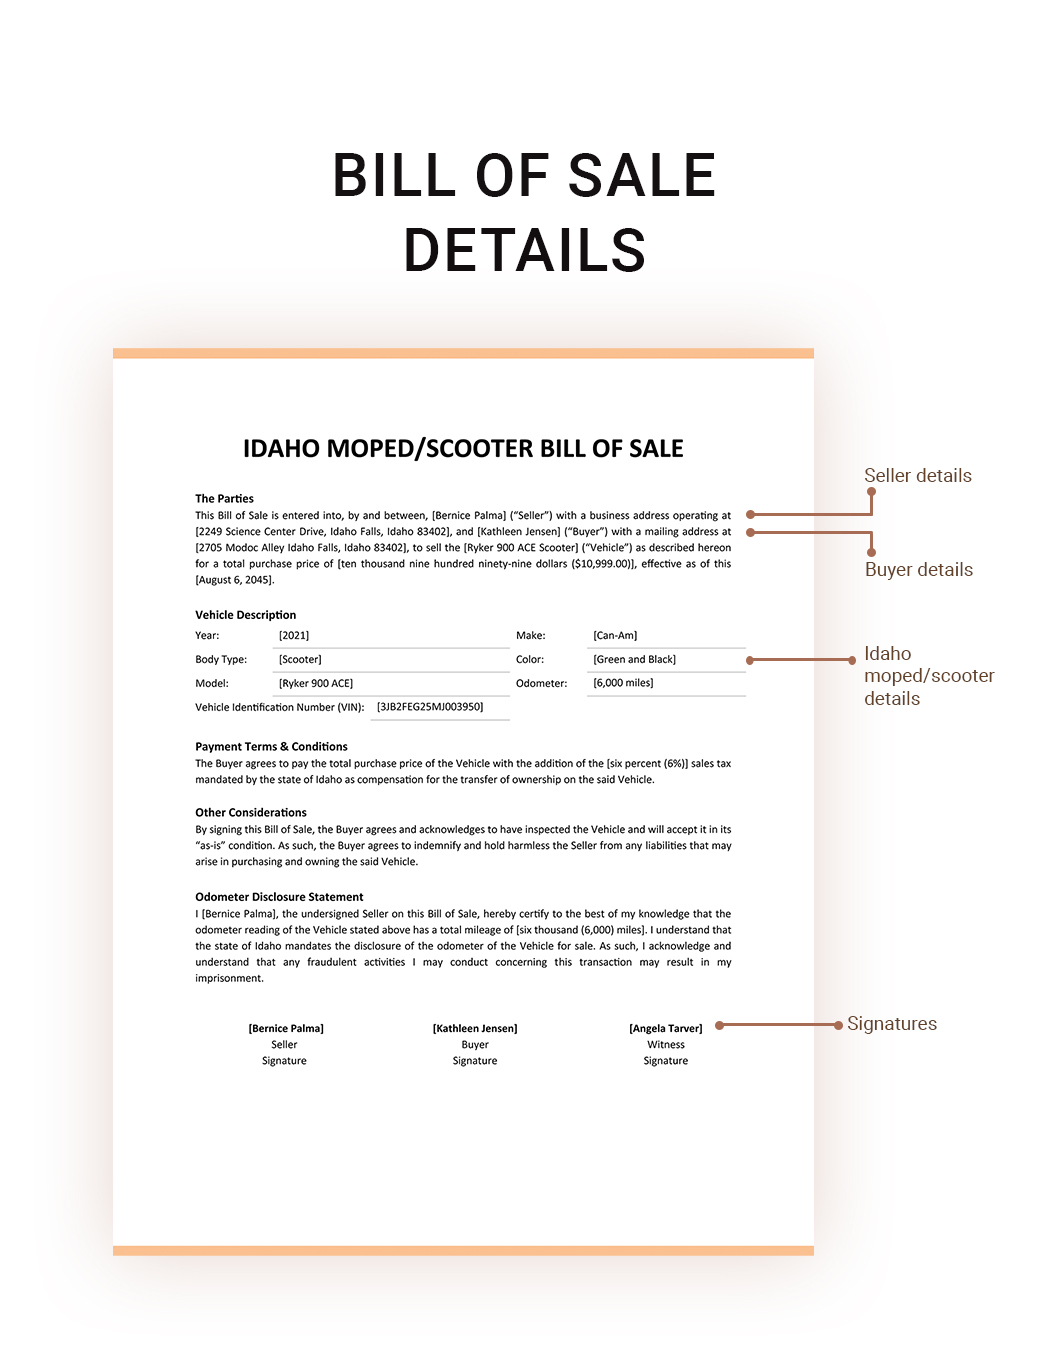 Idaho Moped / Scooter Bill Of Sale Template